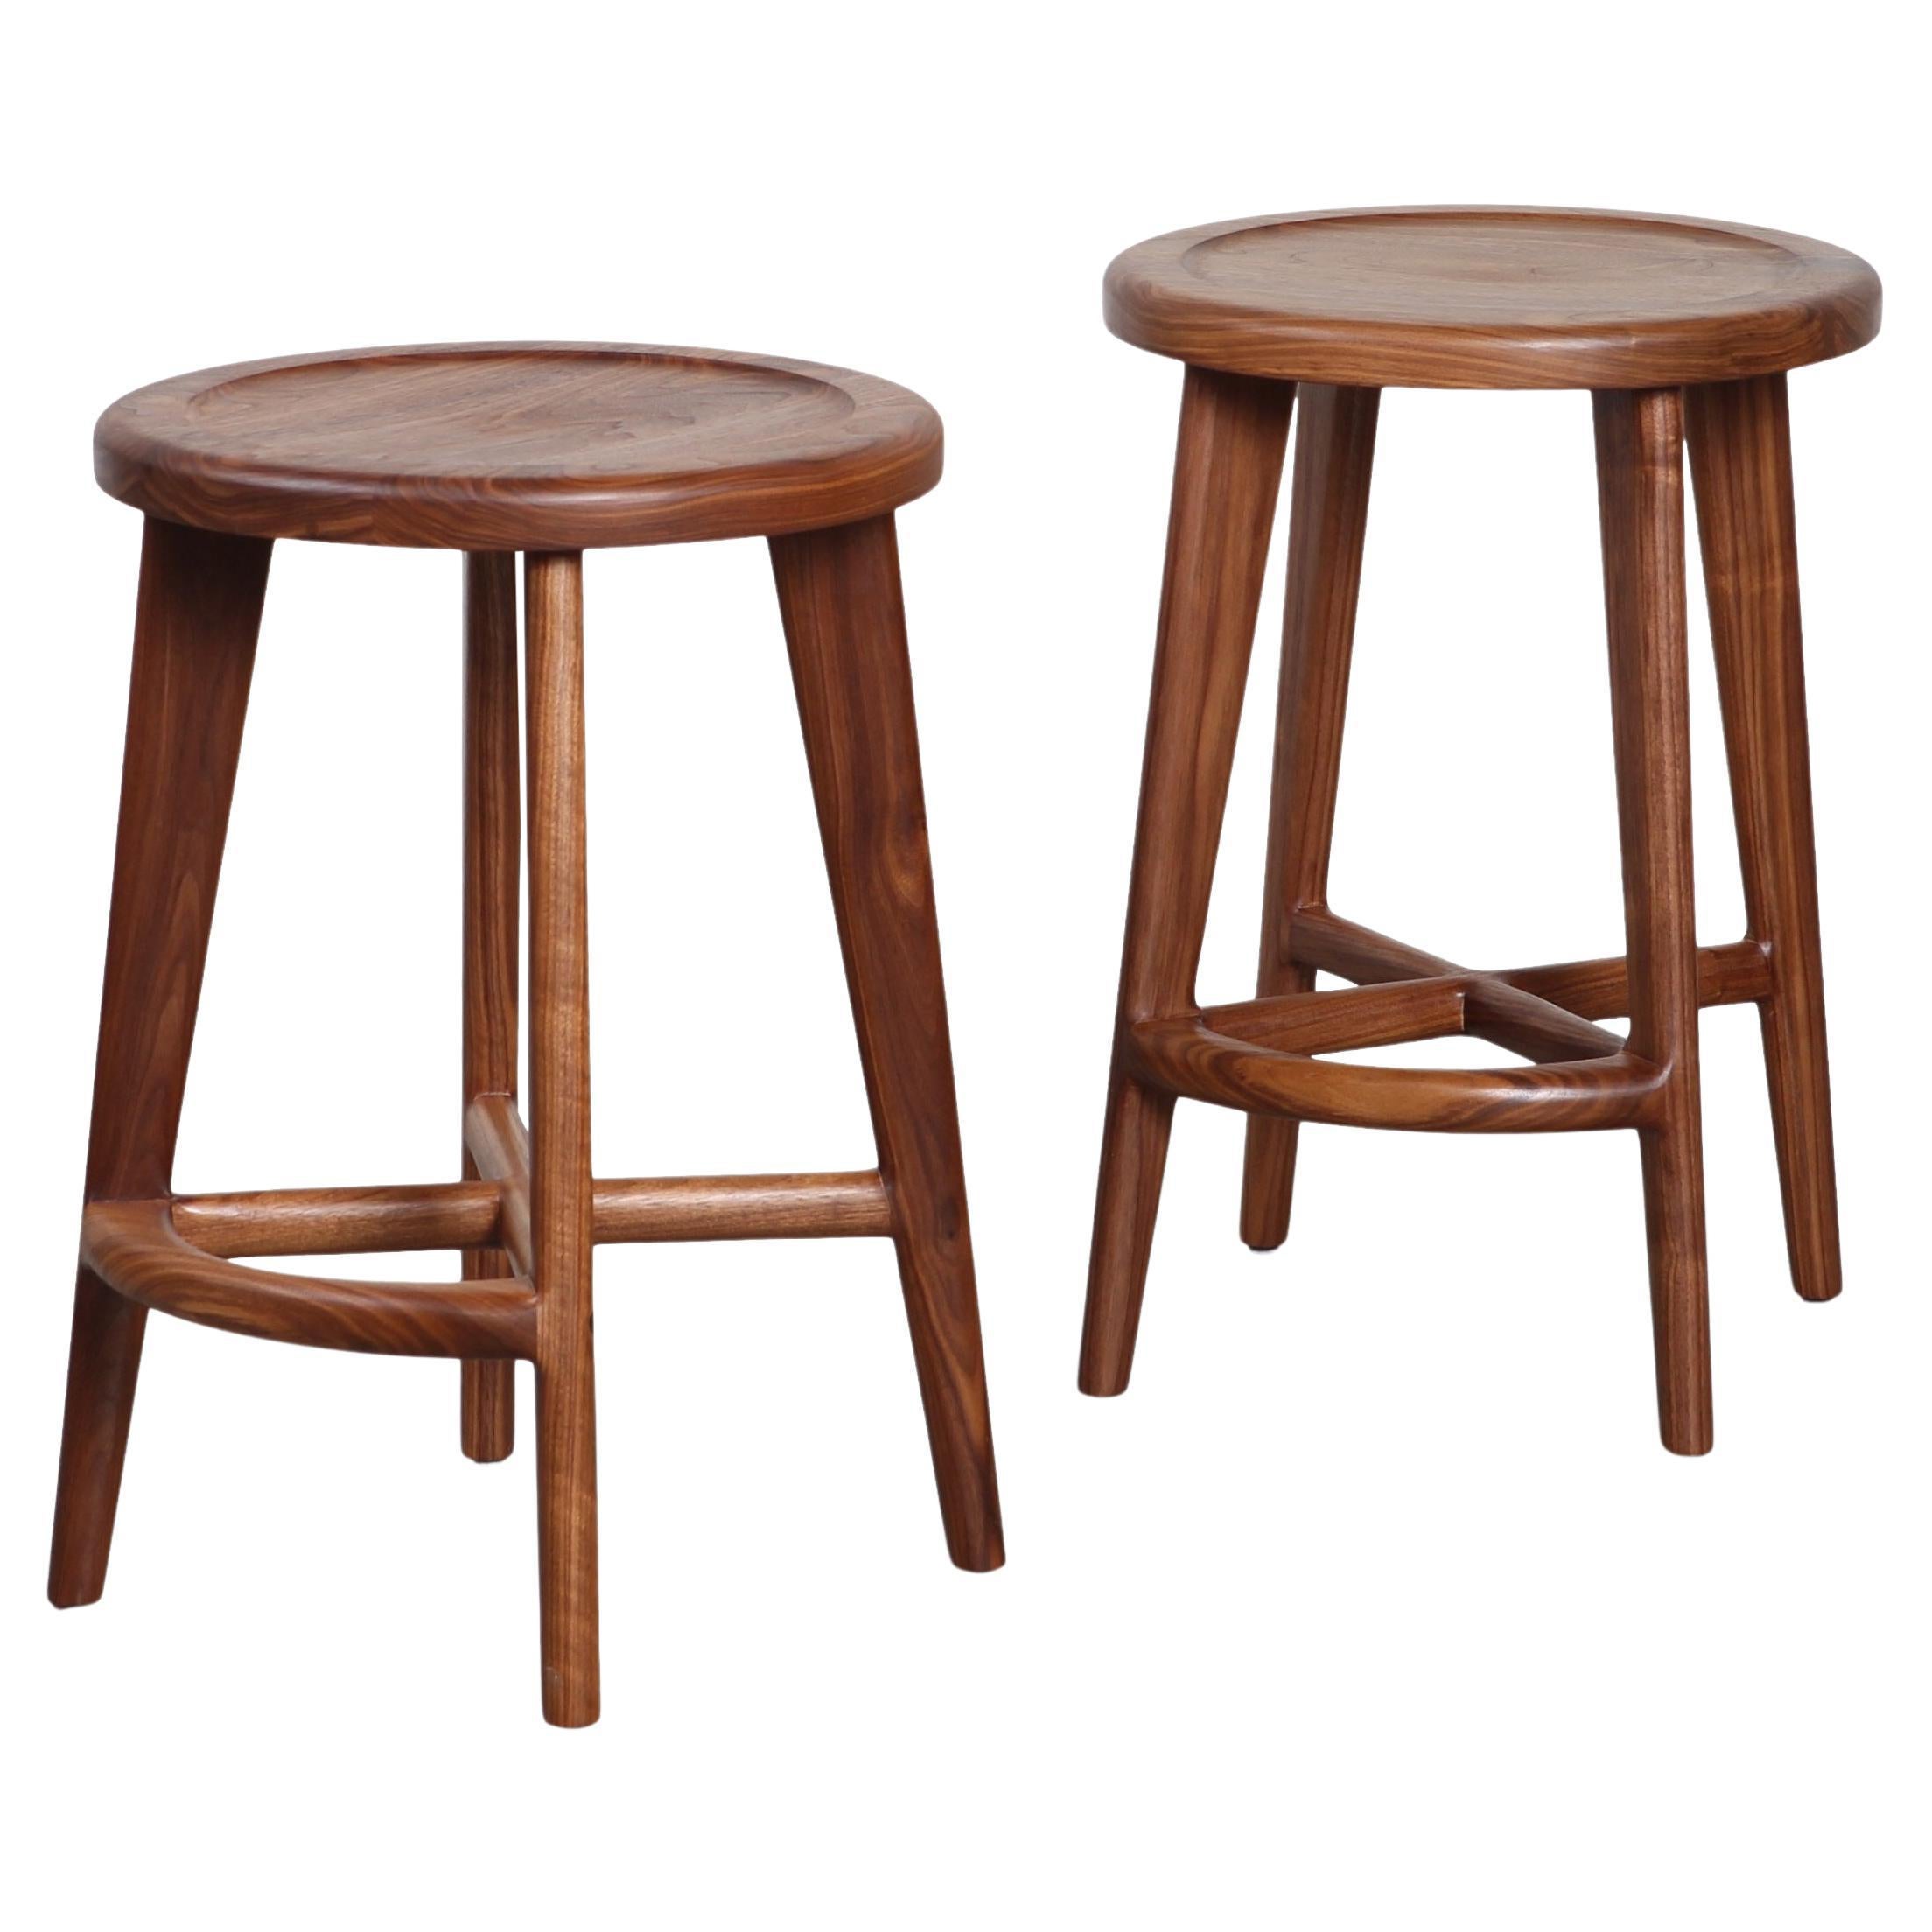 Handcrafted Solid Wood Bar or Counter Stools, Walnut - (Set of 2) Ready to Ship For Sale